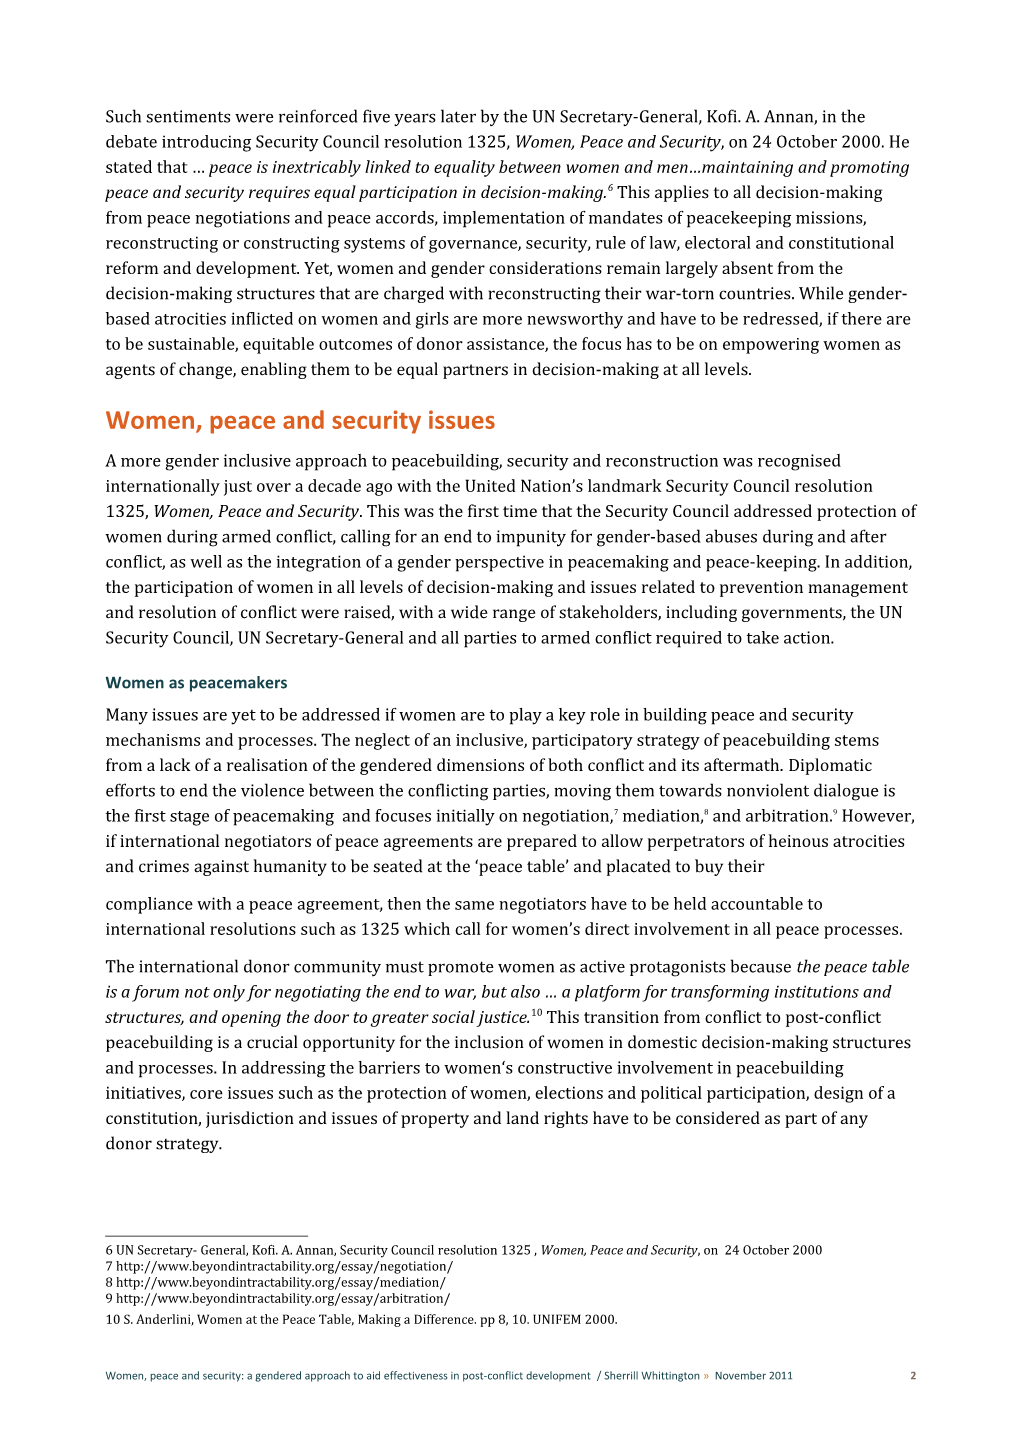 Women, Peace and Security: a Gendered Approach to Aid Effectiveness in Post-Conflict Development